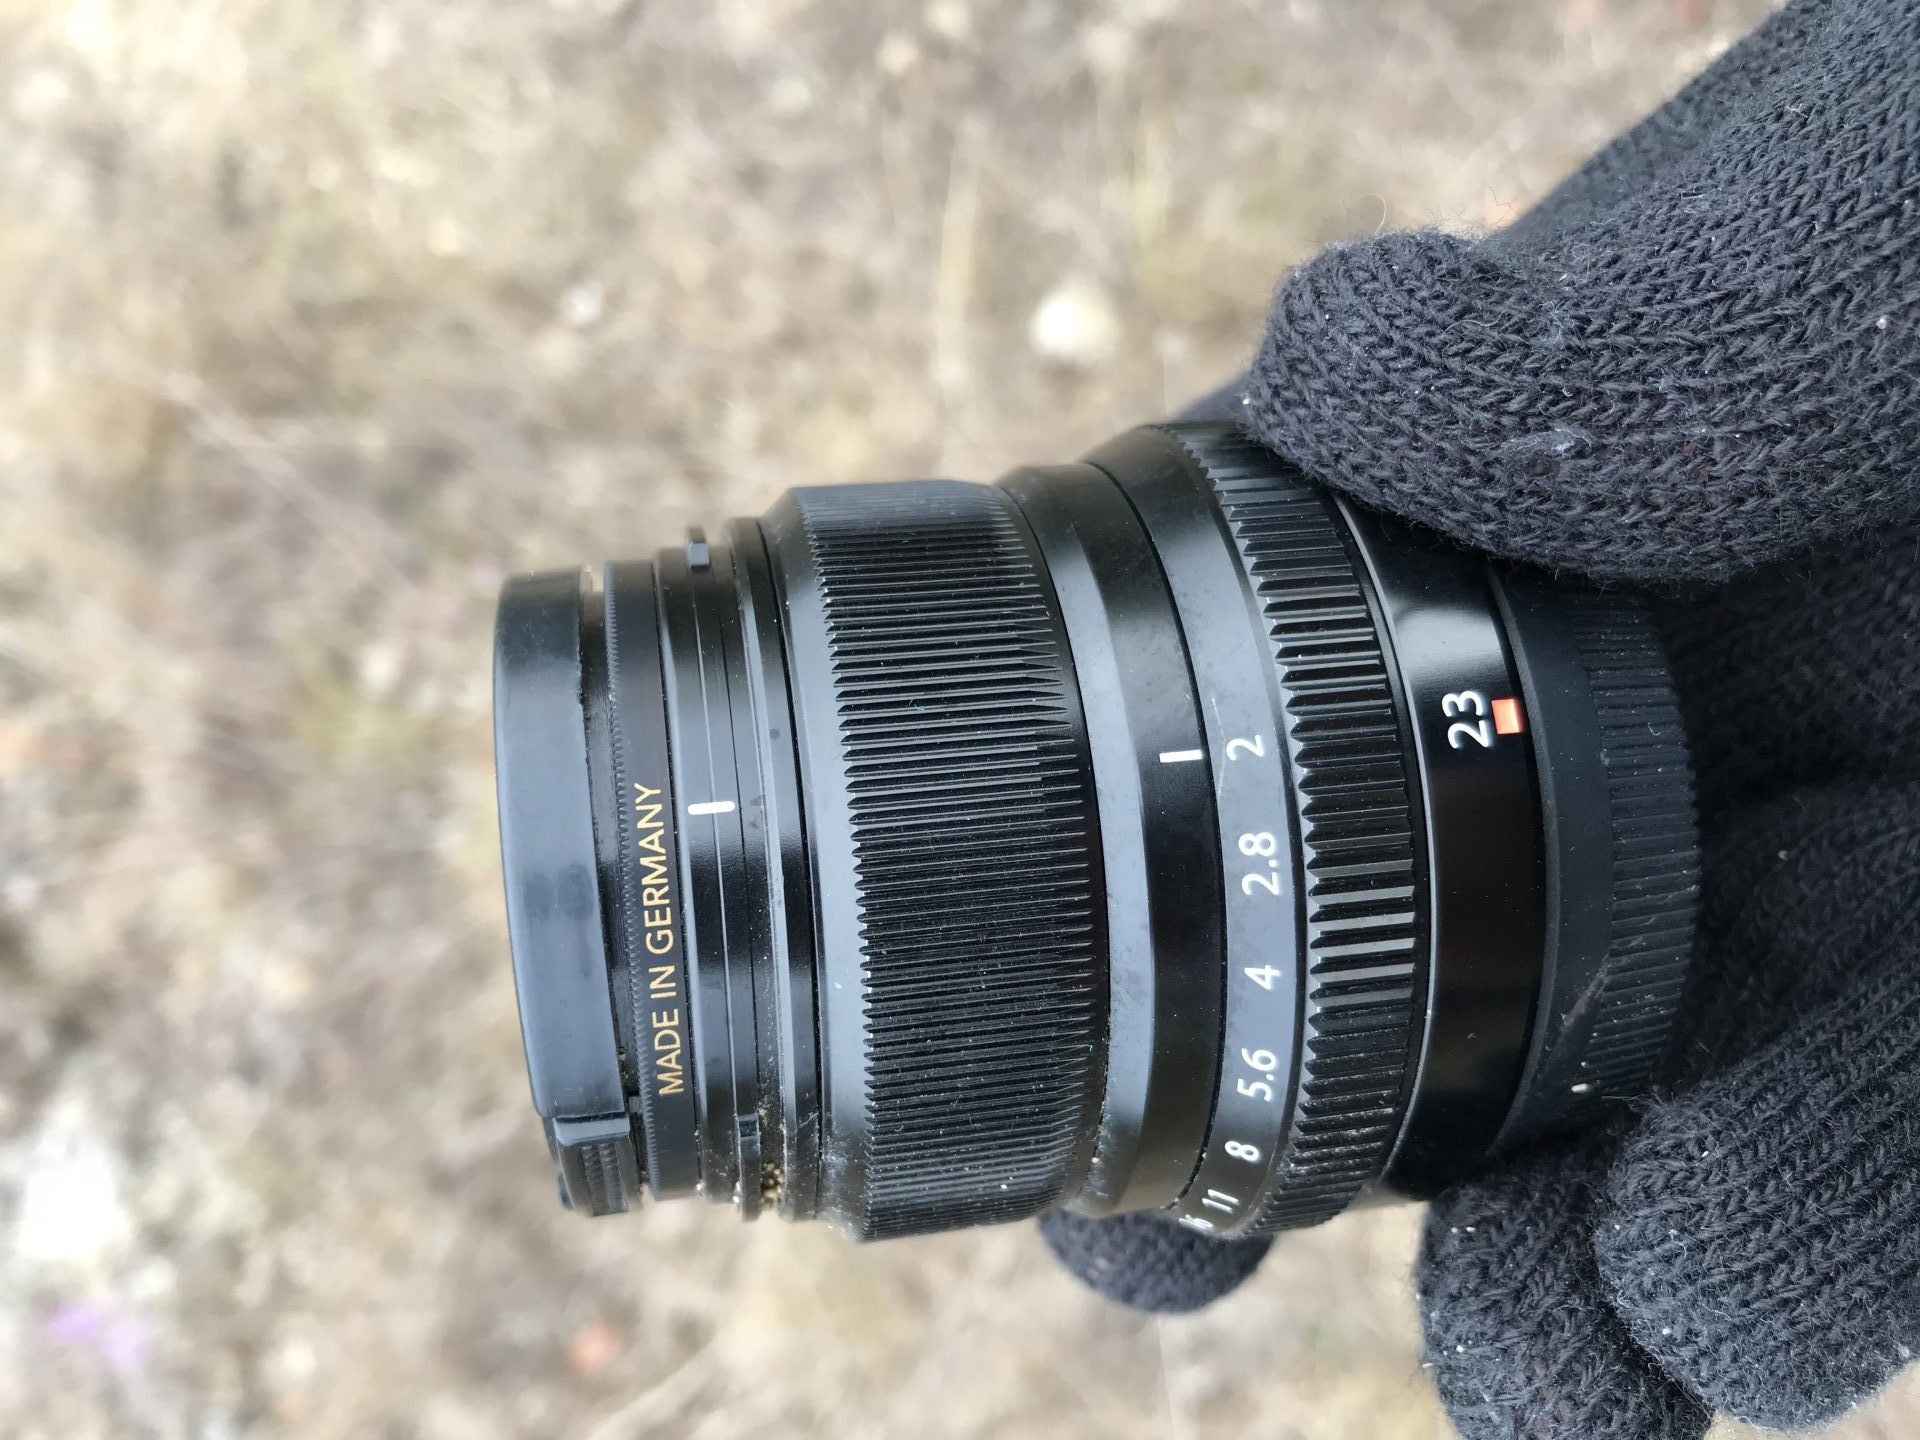 Fuji Lens Rained on and Baked in the Wilderness for 4 Months, Still Works